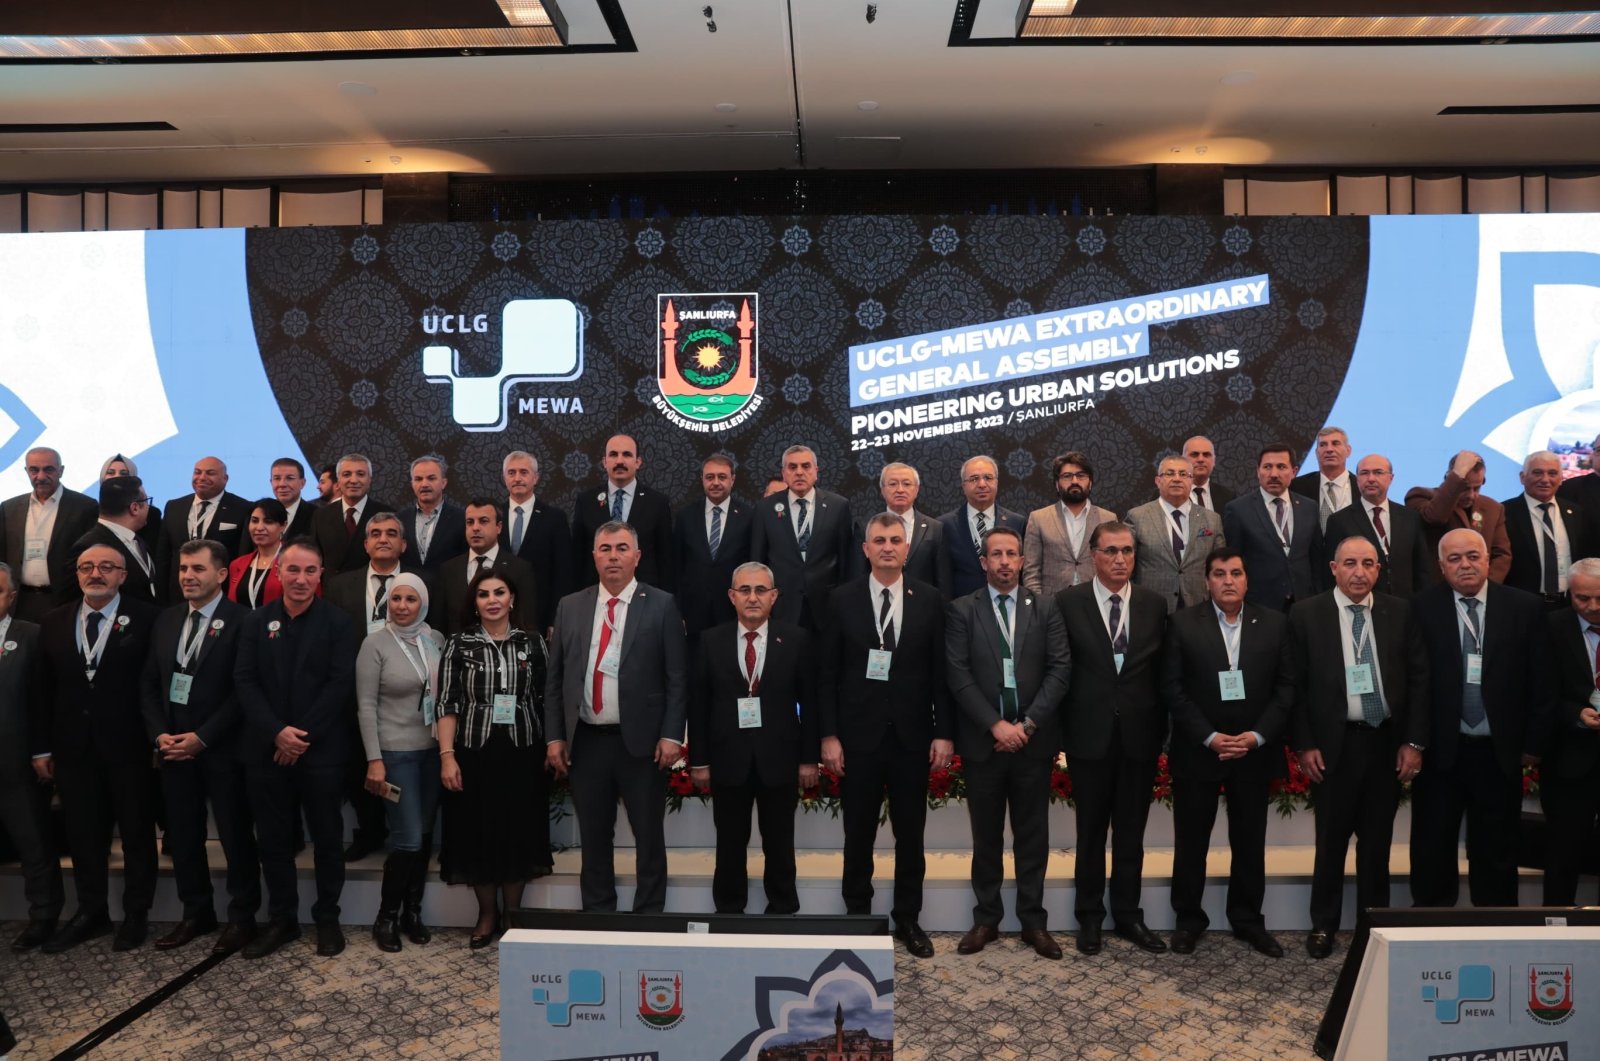 Participants of the United Cities and Local Governments Middle East and West Asia Section (UCLG-MEWA) Extraordinary General Assembly pose for a group photo in Şanlıurfa, Türkiye, Nov. 22, 2023. (IHA Photo)